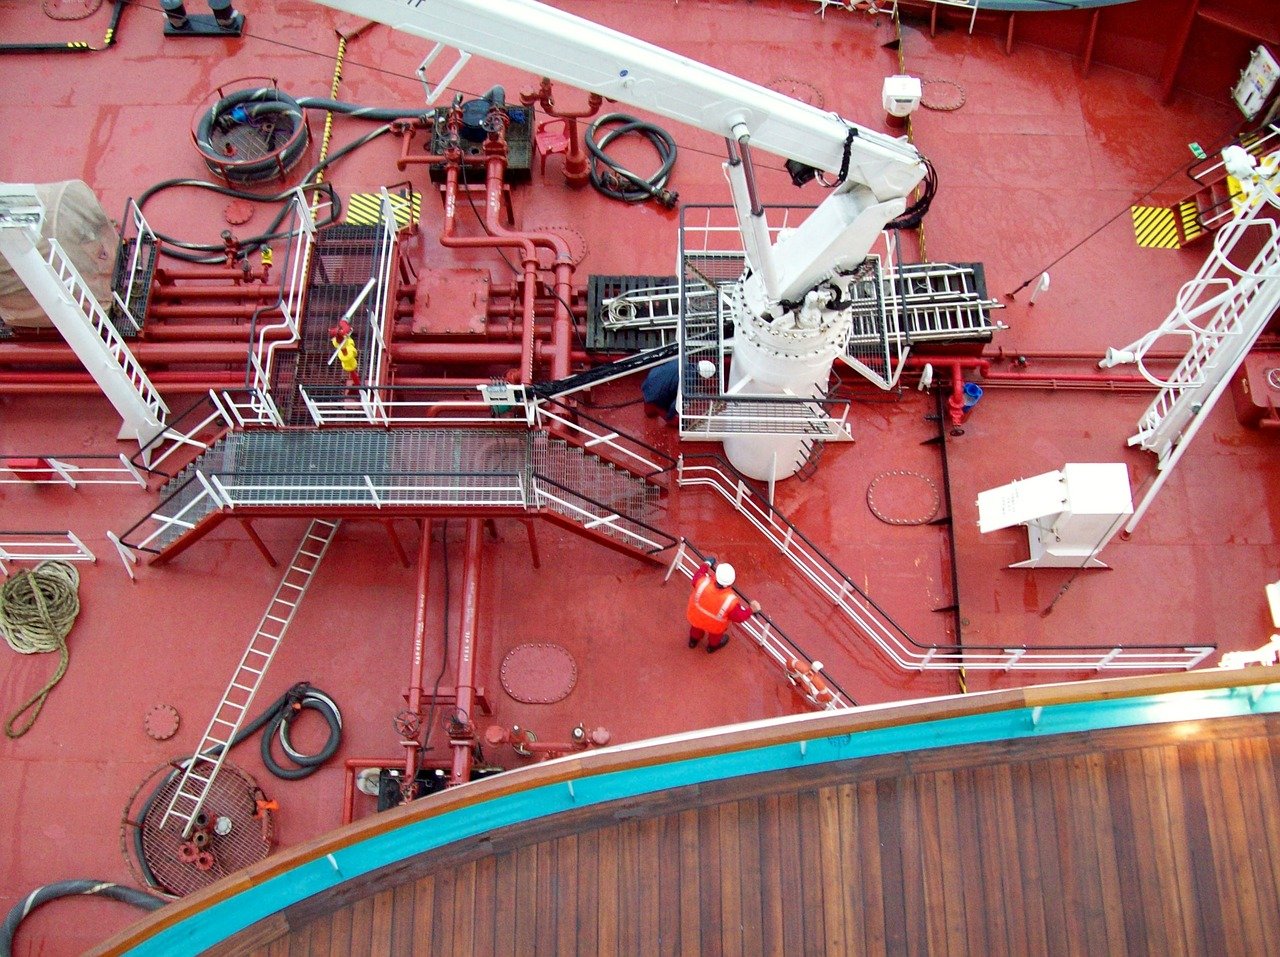 Safety equipment becomes snag hazard and crew member injures finger